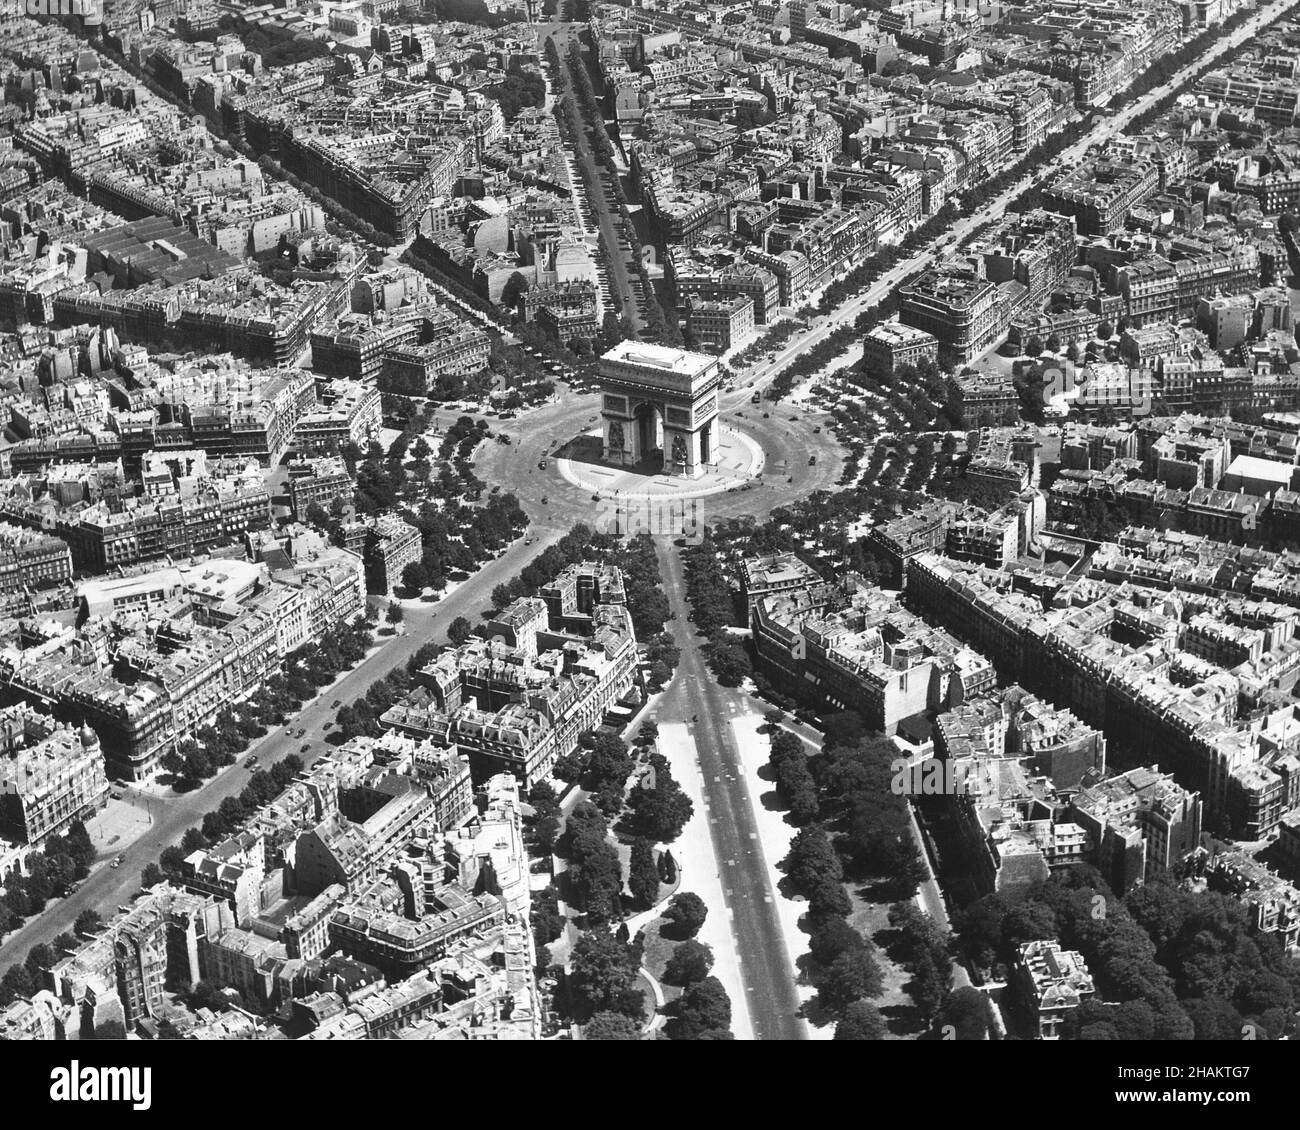 Paris - low level aerial photo centered on the Arc de Triomphe during Occupation, 1944. The view of the streets of Paris as they radiate out from the Arc de Triomphe was taken from a low flying US airplane using a photo method called low-level-oblique. The camera position is roughly west of the Arc de Triomphe and the street that points most to photographer is Avenue Foch. Avenue des Champs-Elysees runs from the center to the upper right corner of the image. There are less than thirty motor vehicles on the circular Place de l'Etoile around the famous Arch. Stock Photo